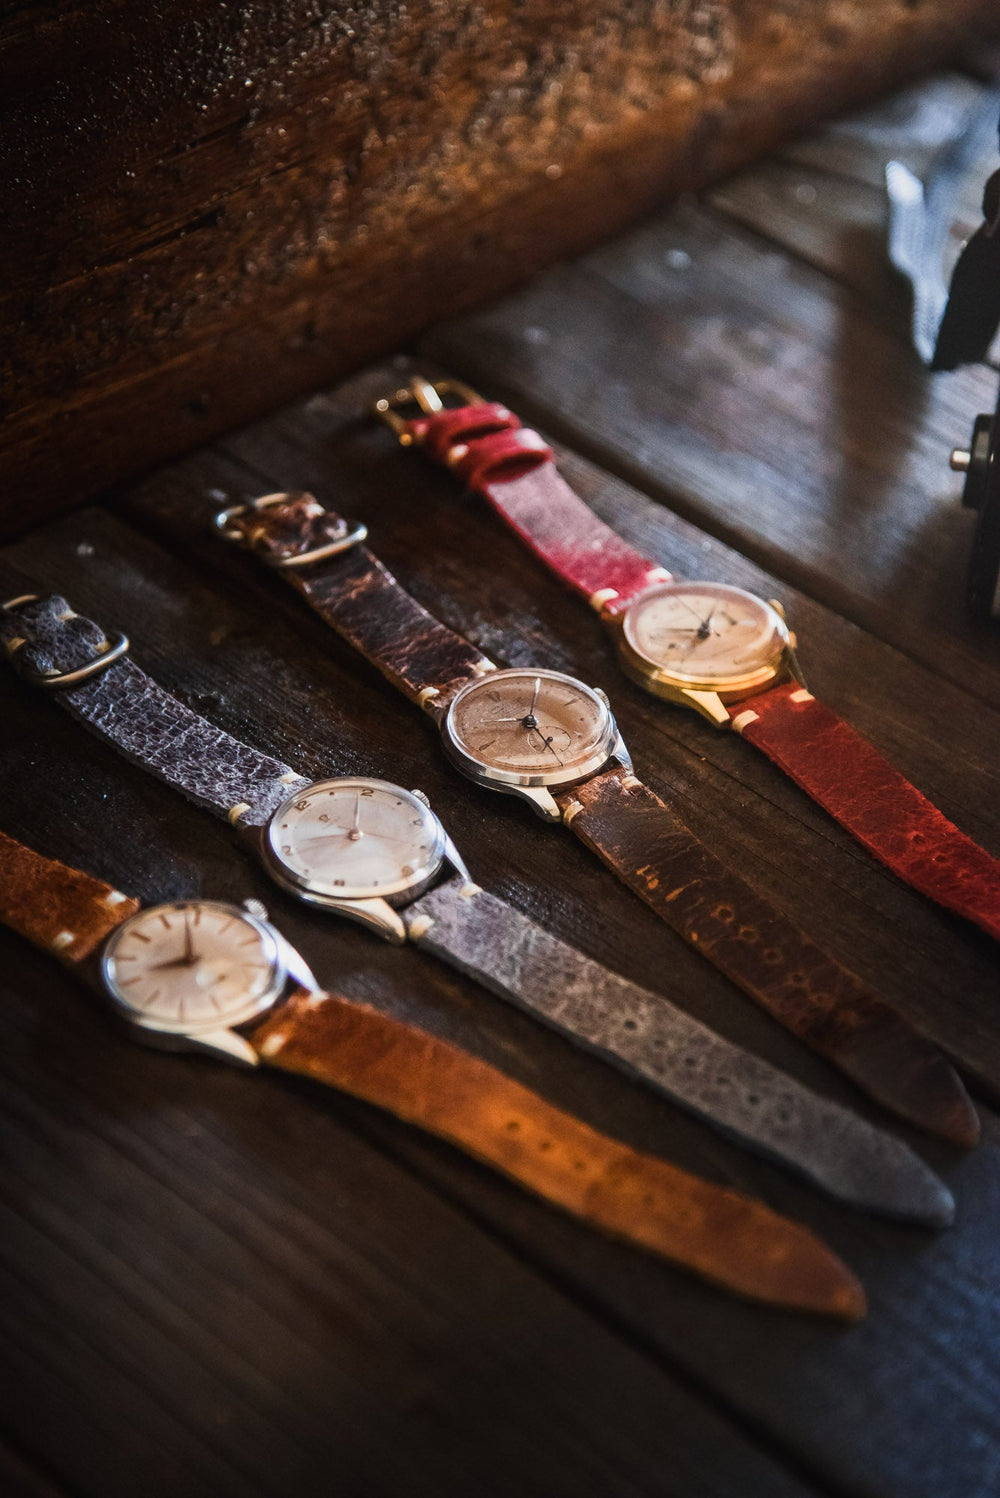 Ostrich leather watch straps/ Cognac color/ handmade to order in Finland